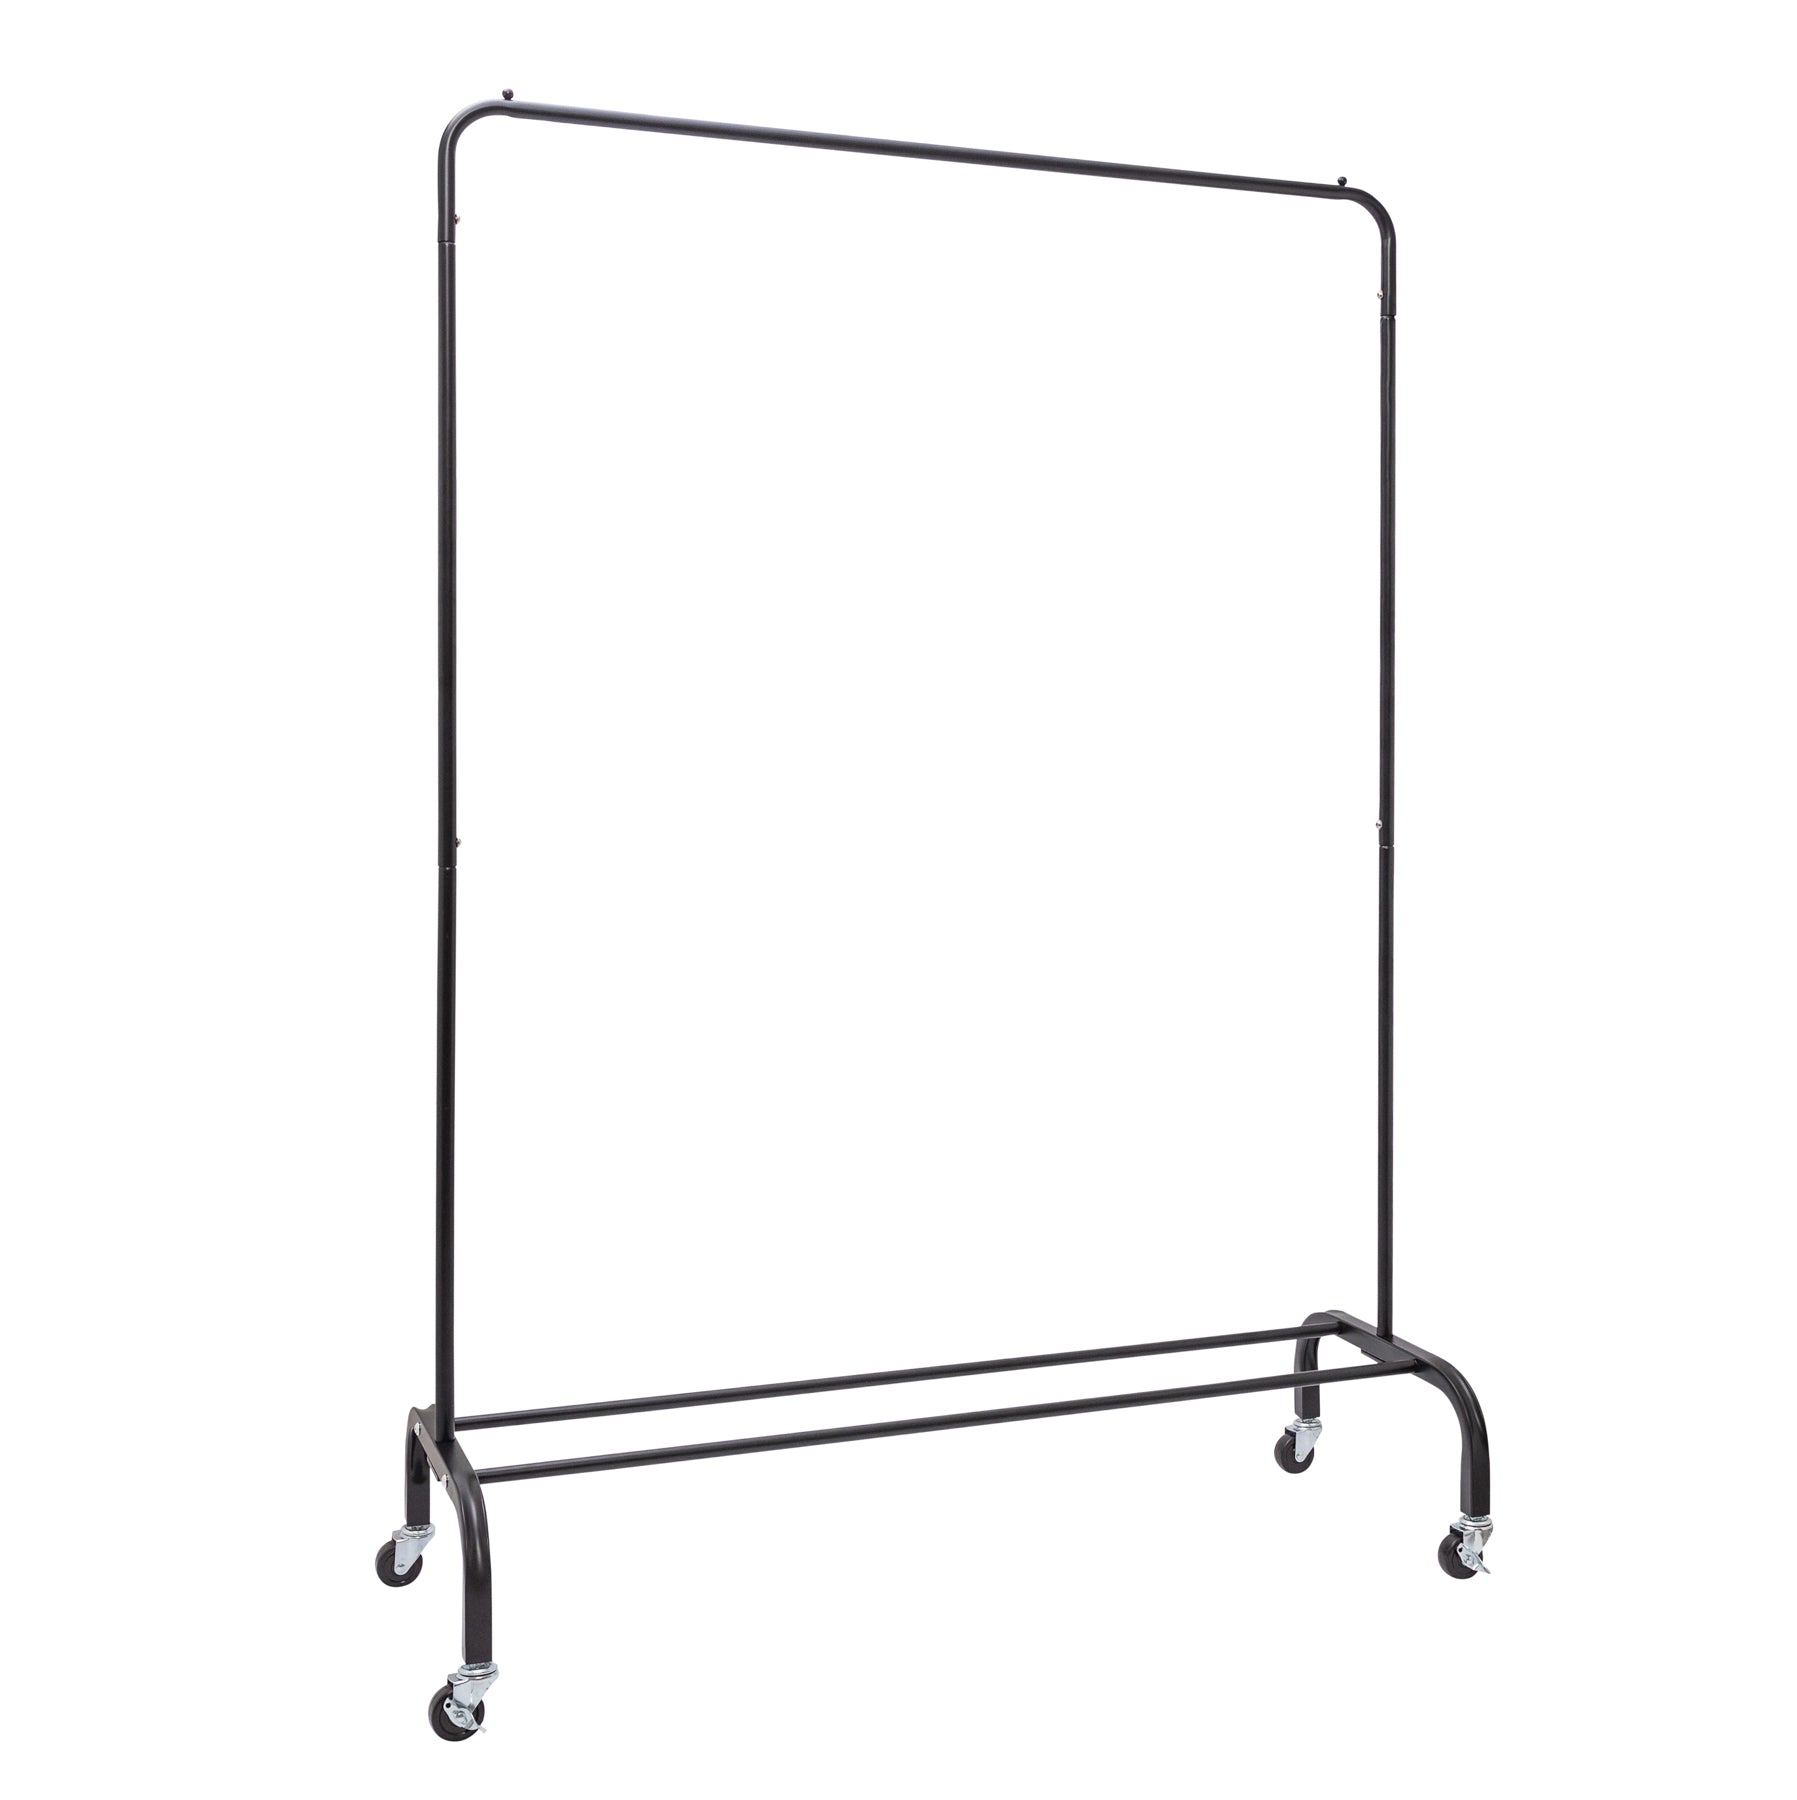 Clothes Rack with Extra Thick Rails - Black - 60kgs Weight Capacity - Enhanced Metal Base Design & Durable Wheels Sold in 1/3/5 - Hangersforless